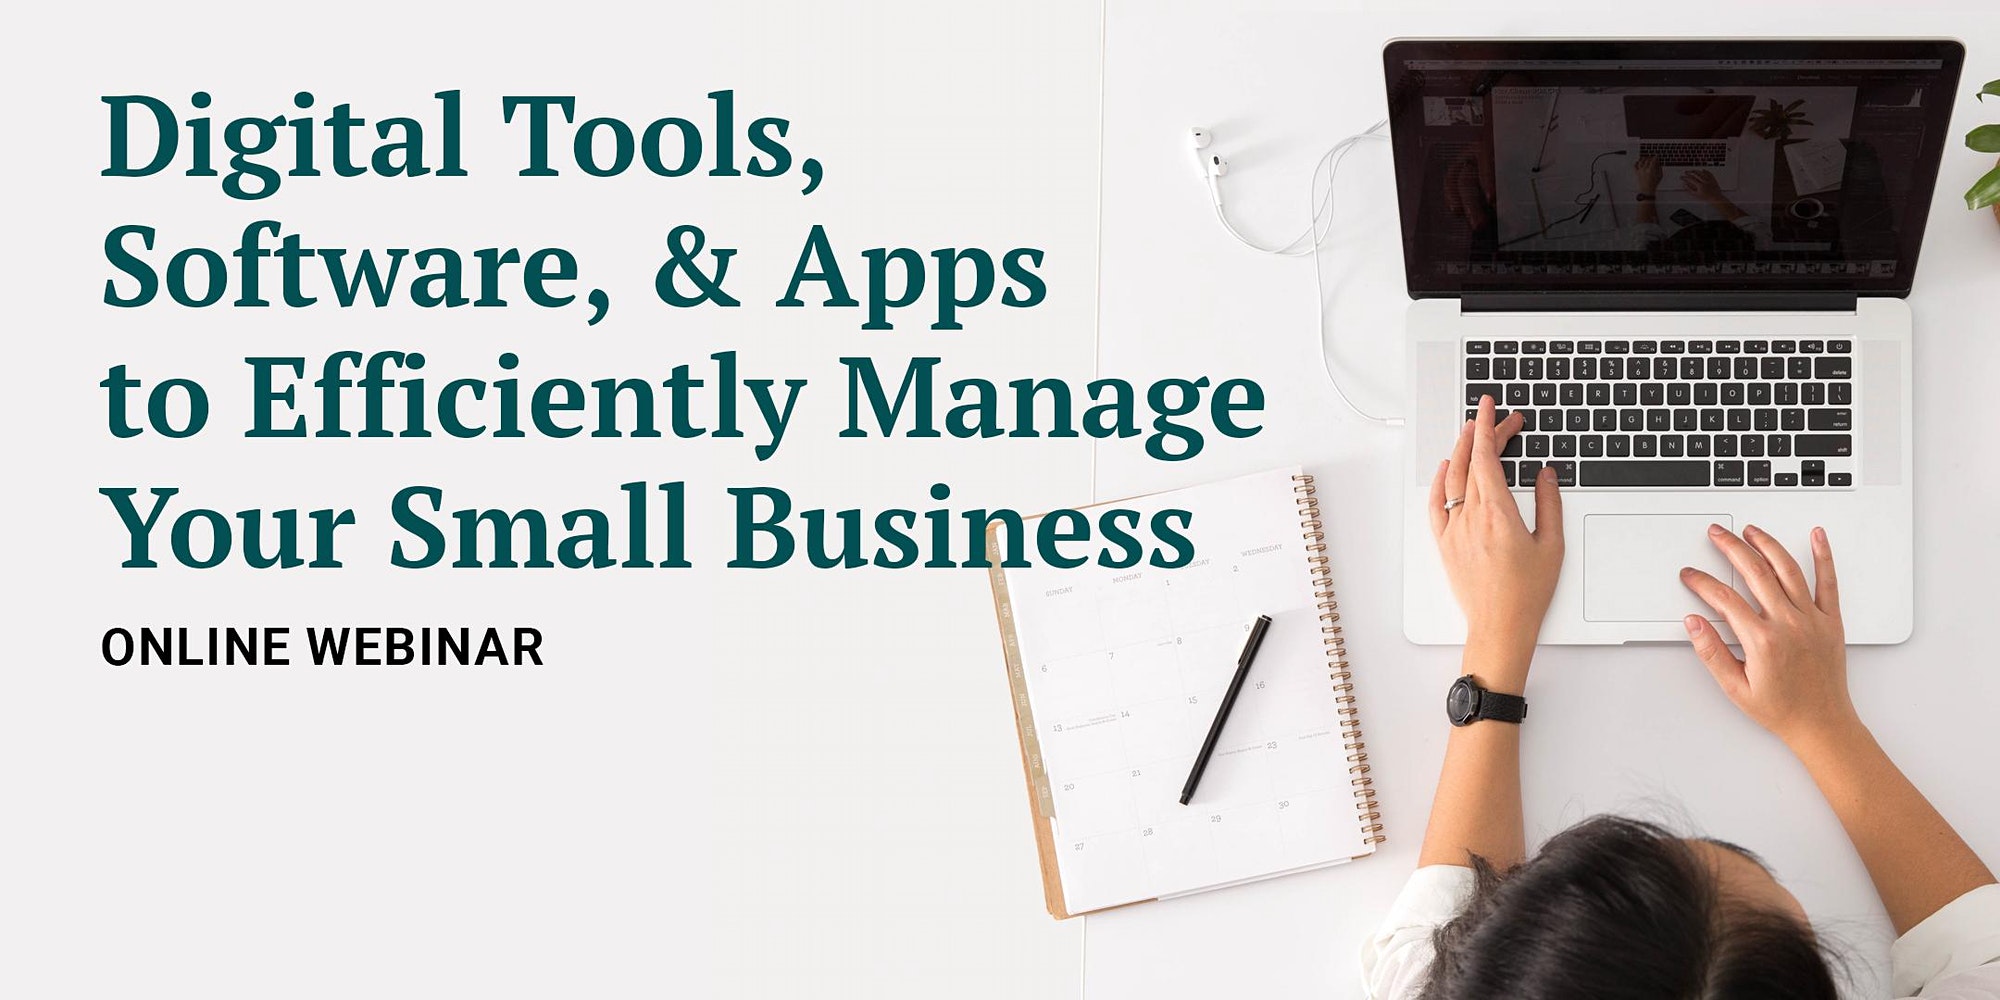 Digital tools, software, & apps to efficiently manage your small business: Online webinar